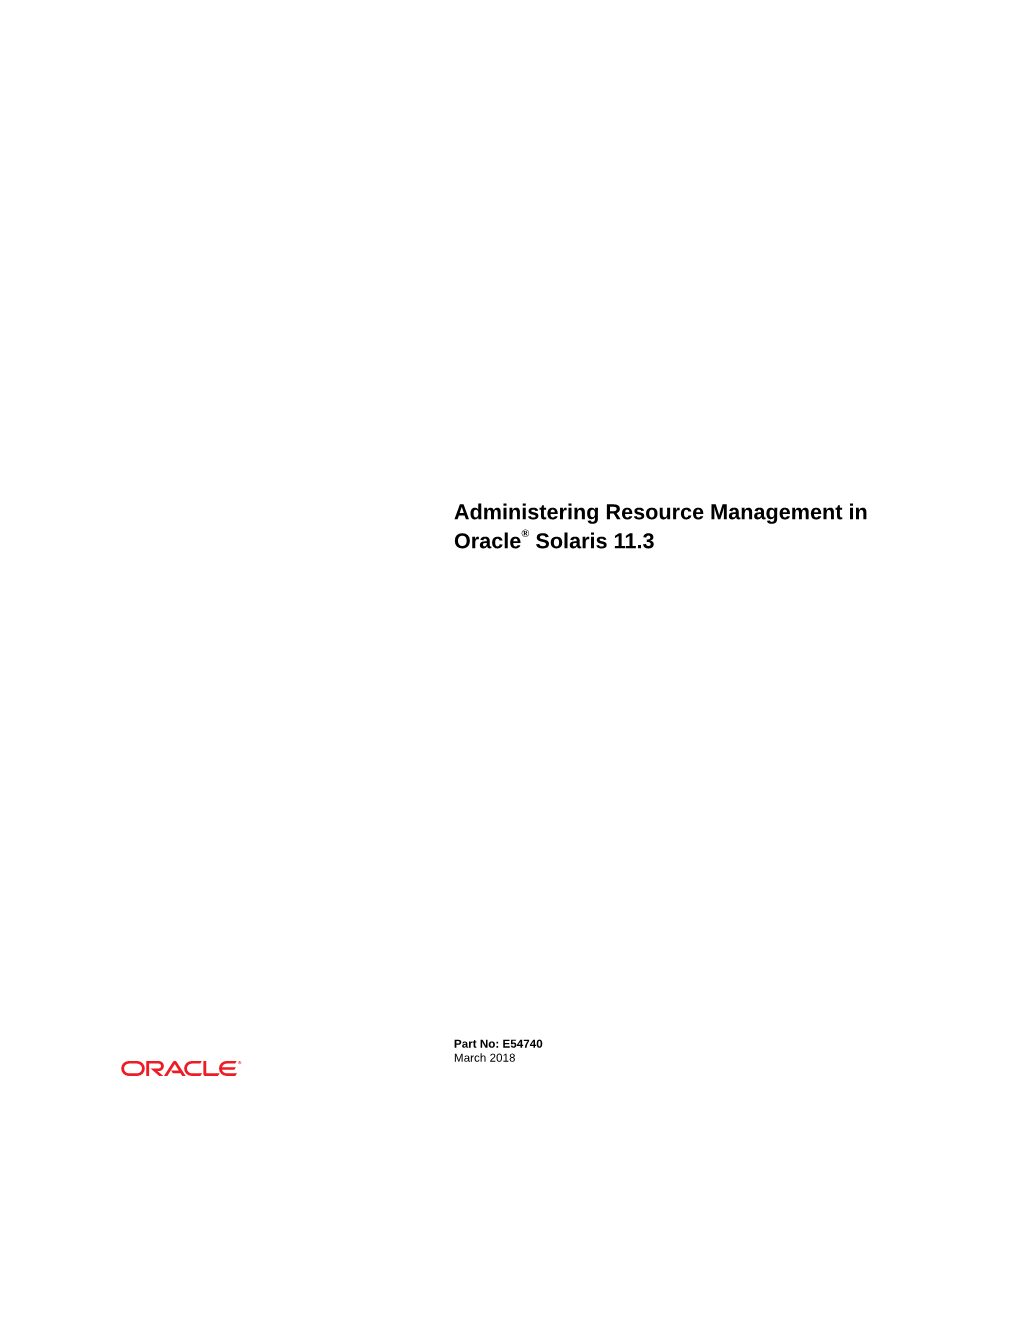 Administering Resource Management in Oracle® Solaris 11.3